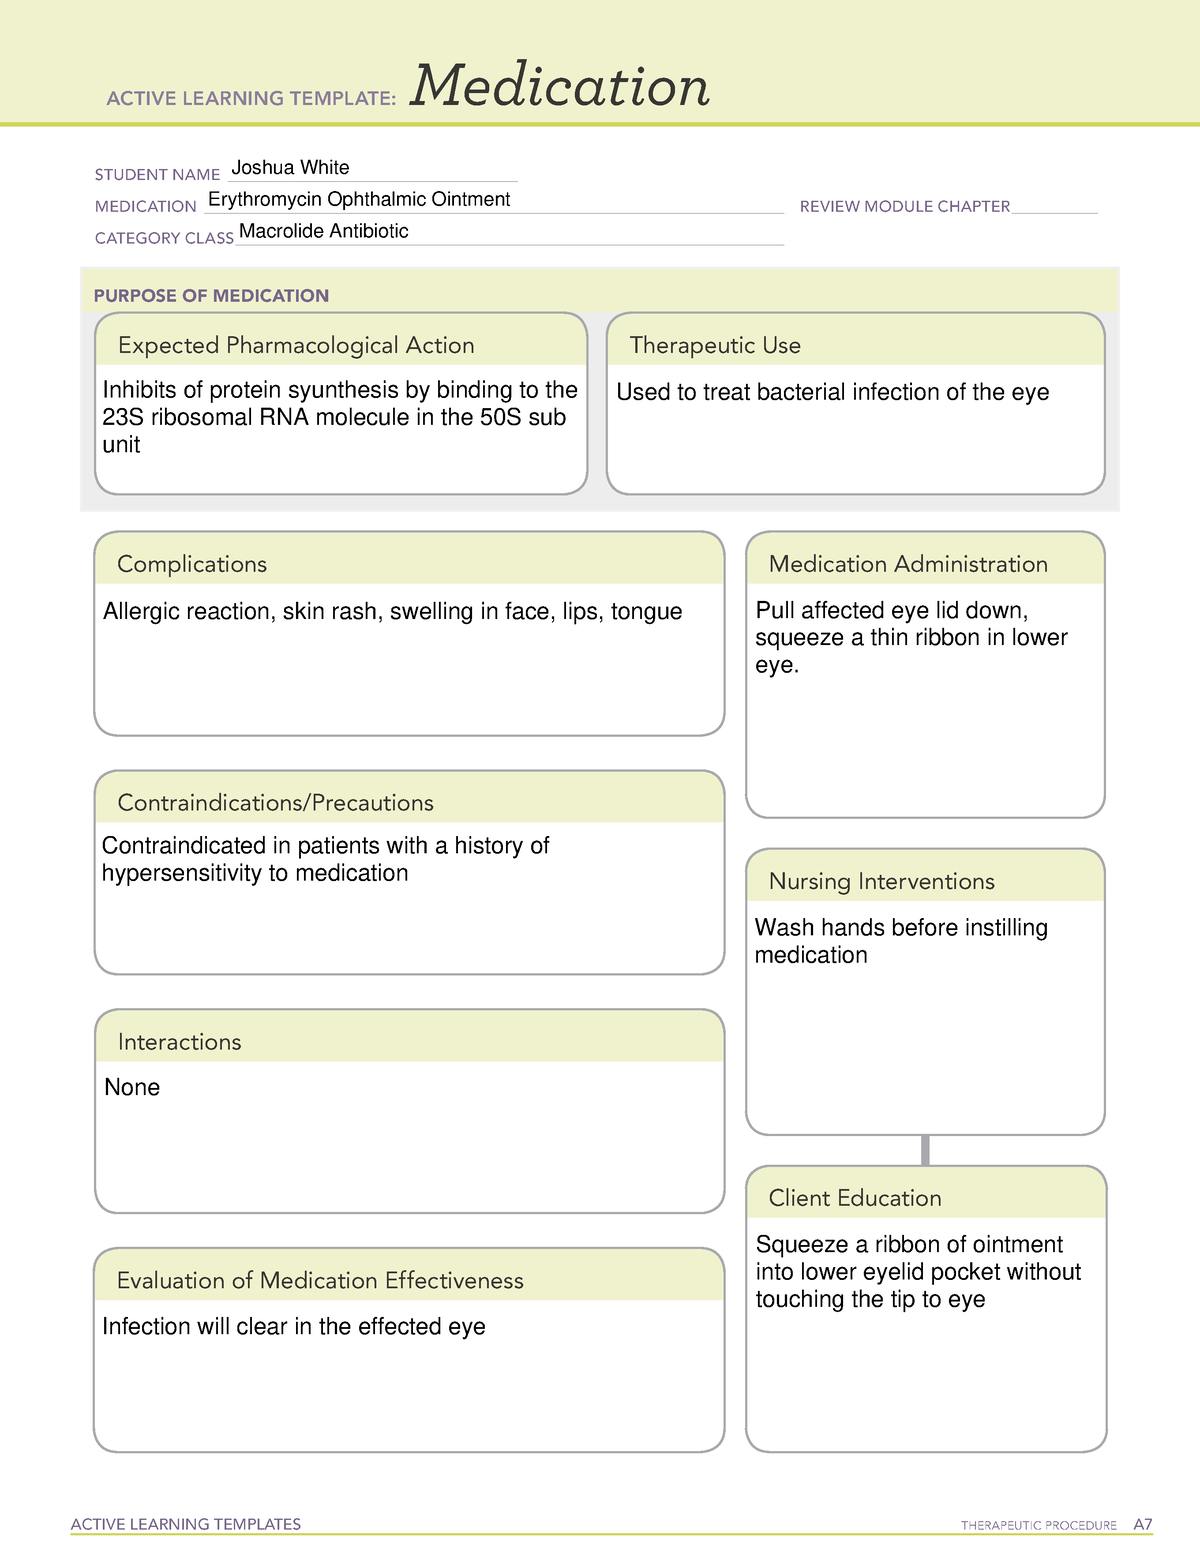 active-learning-template-medication-erythromycin-0-active-learning-templates-therapeutic